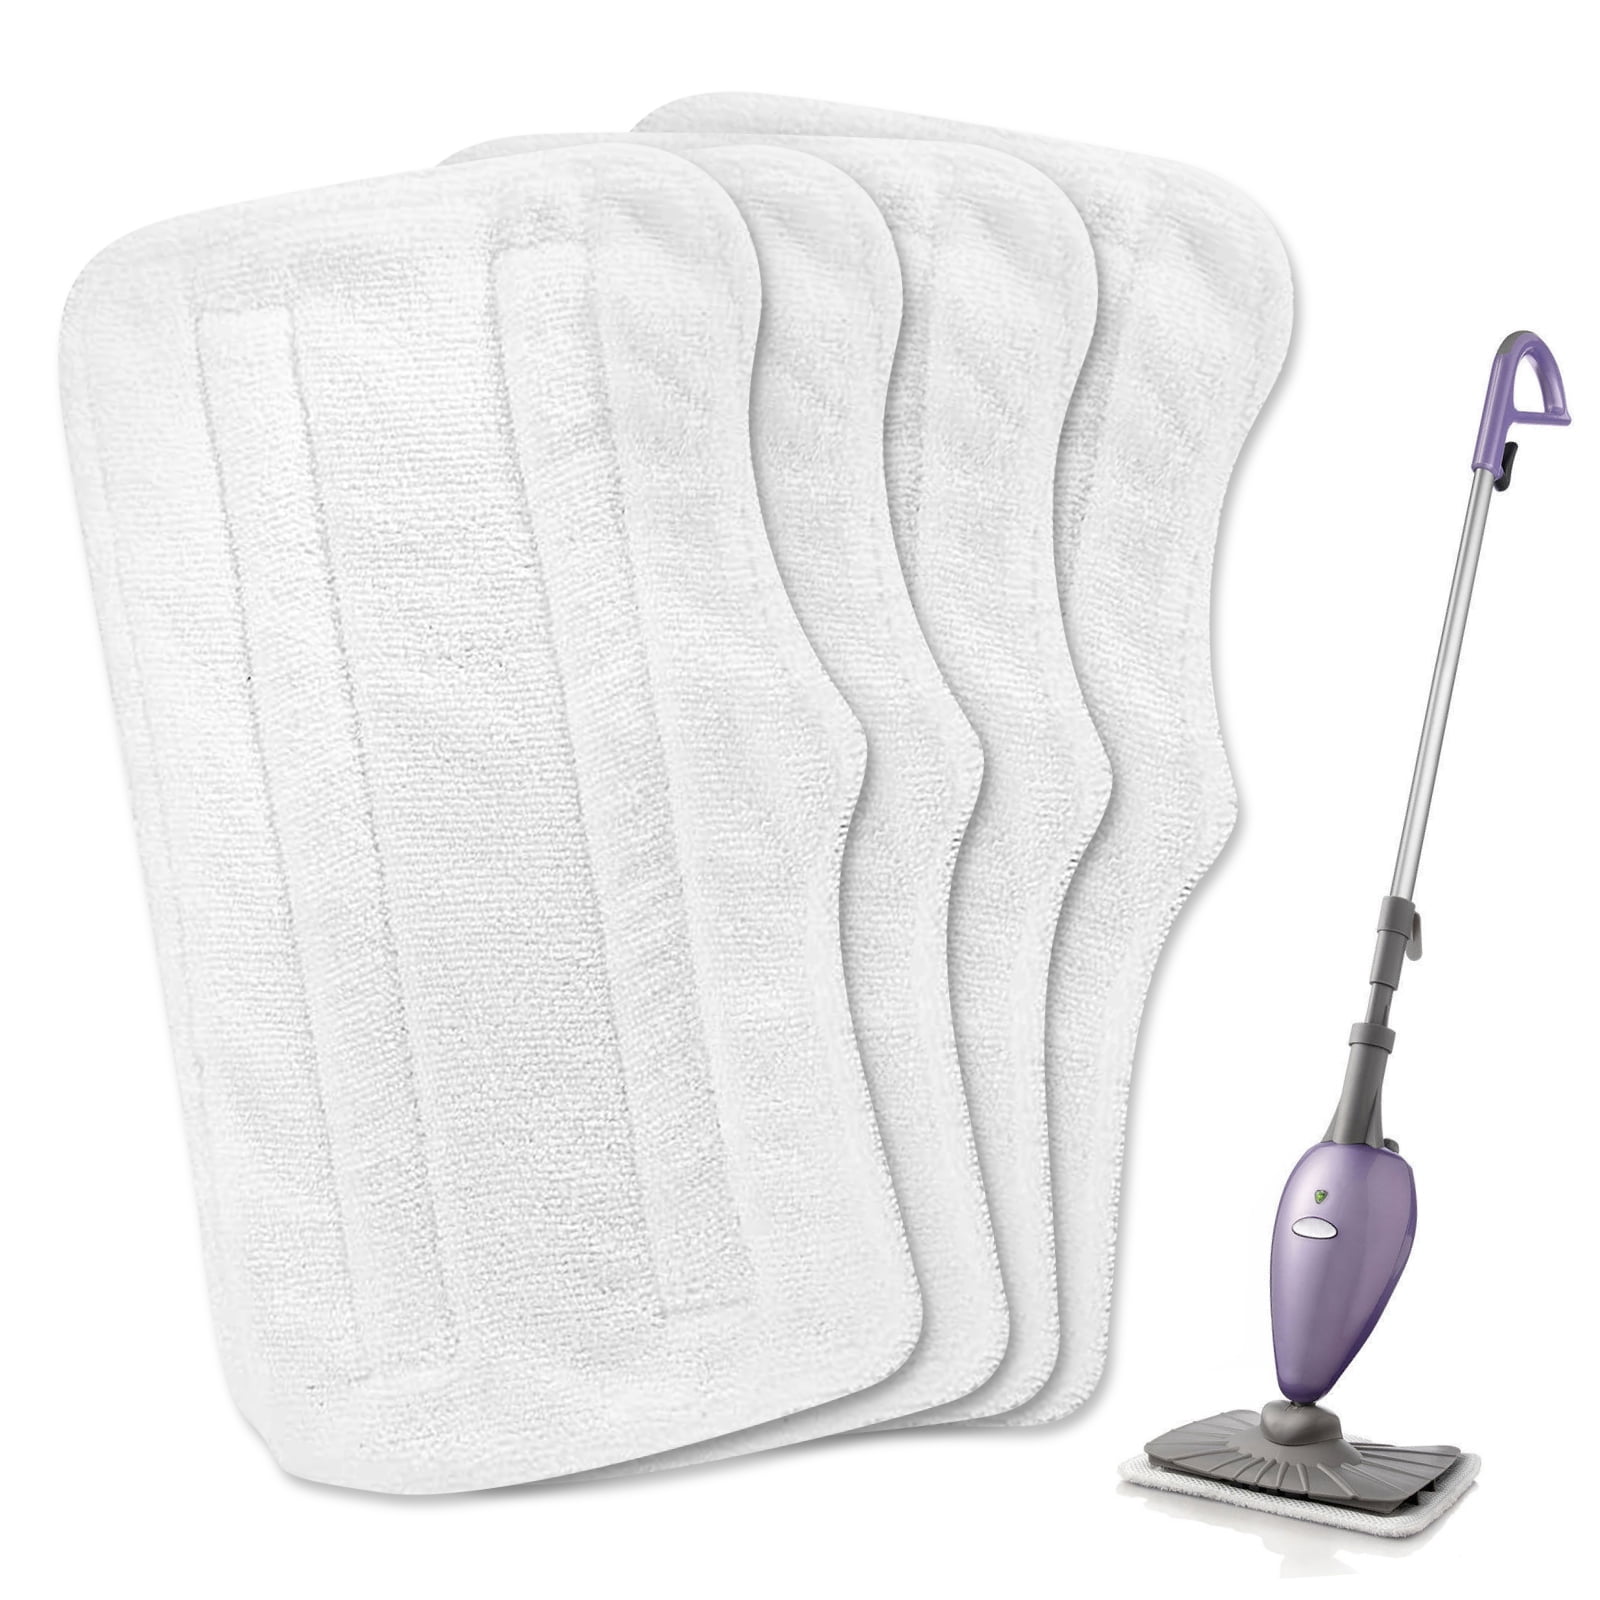 Shark Steam & Scrub Automatic Steam Mop S6002UK - Reusable, Machine  Washable Cleaning Pads